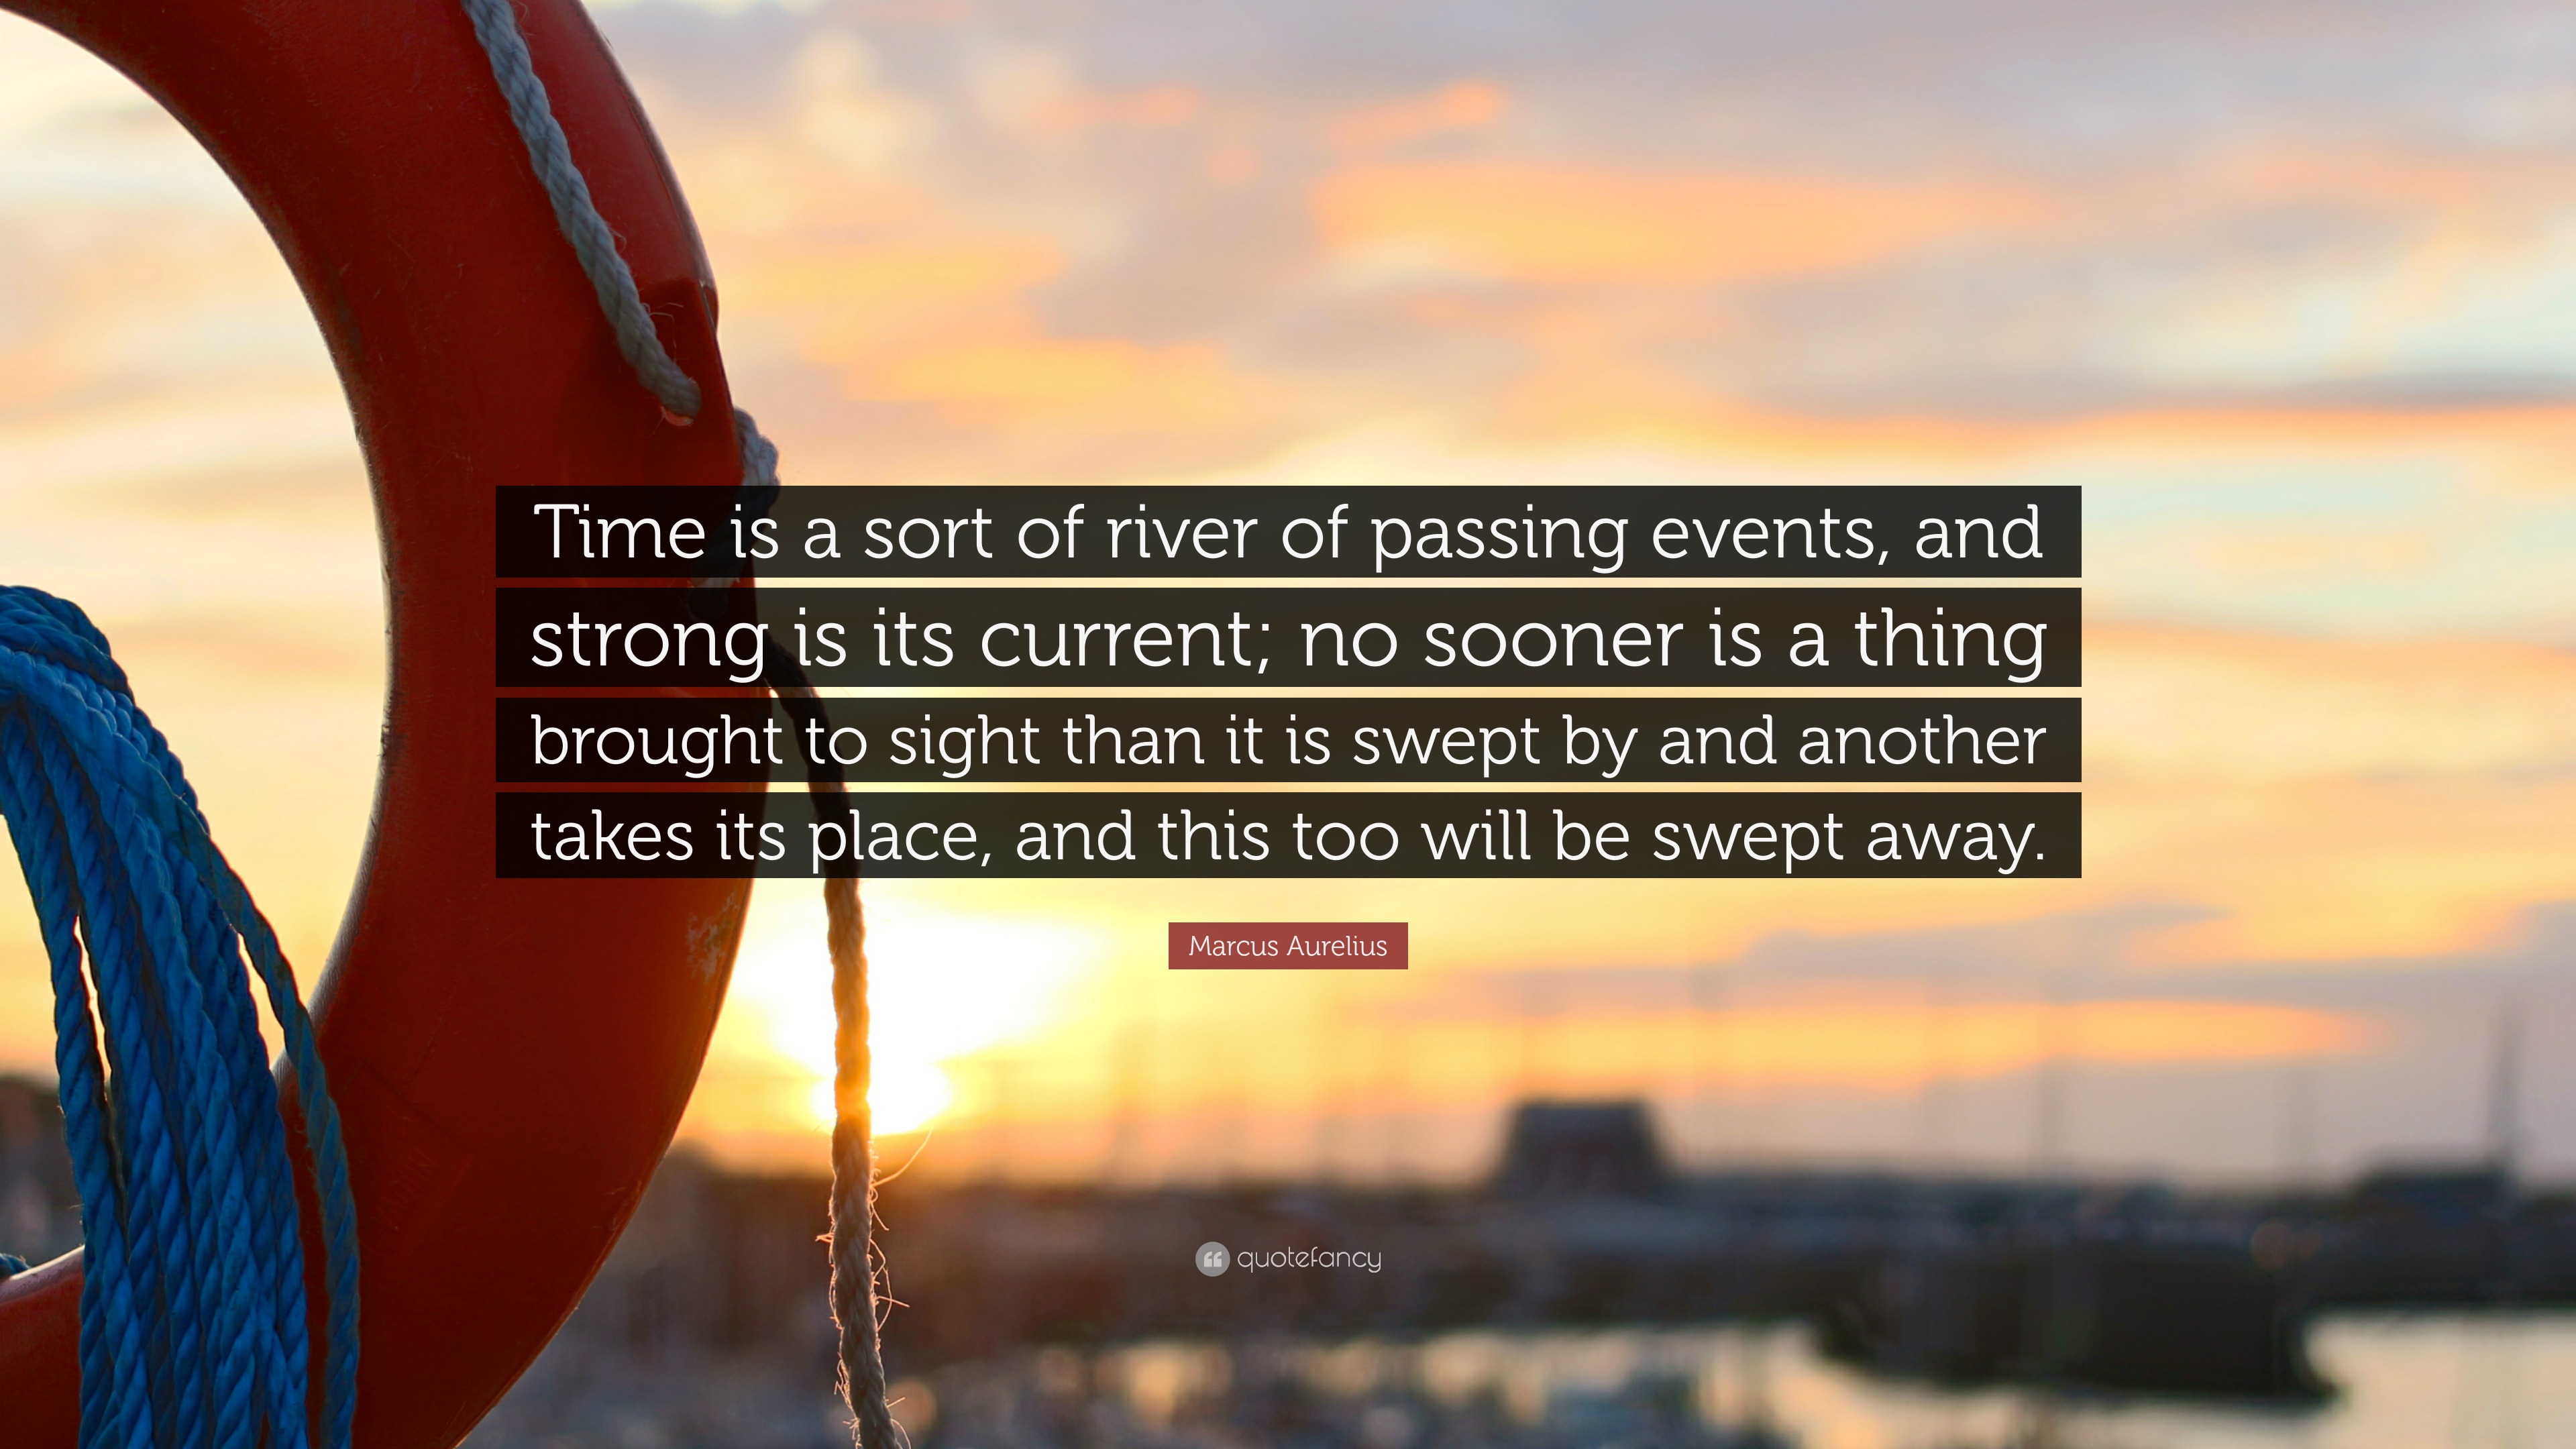 Marcus Aurelius Quote “Time is a sort of river of passing events and